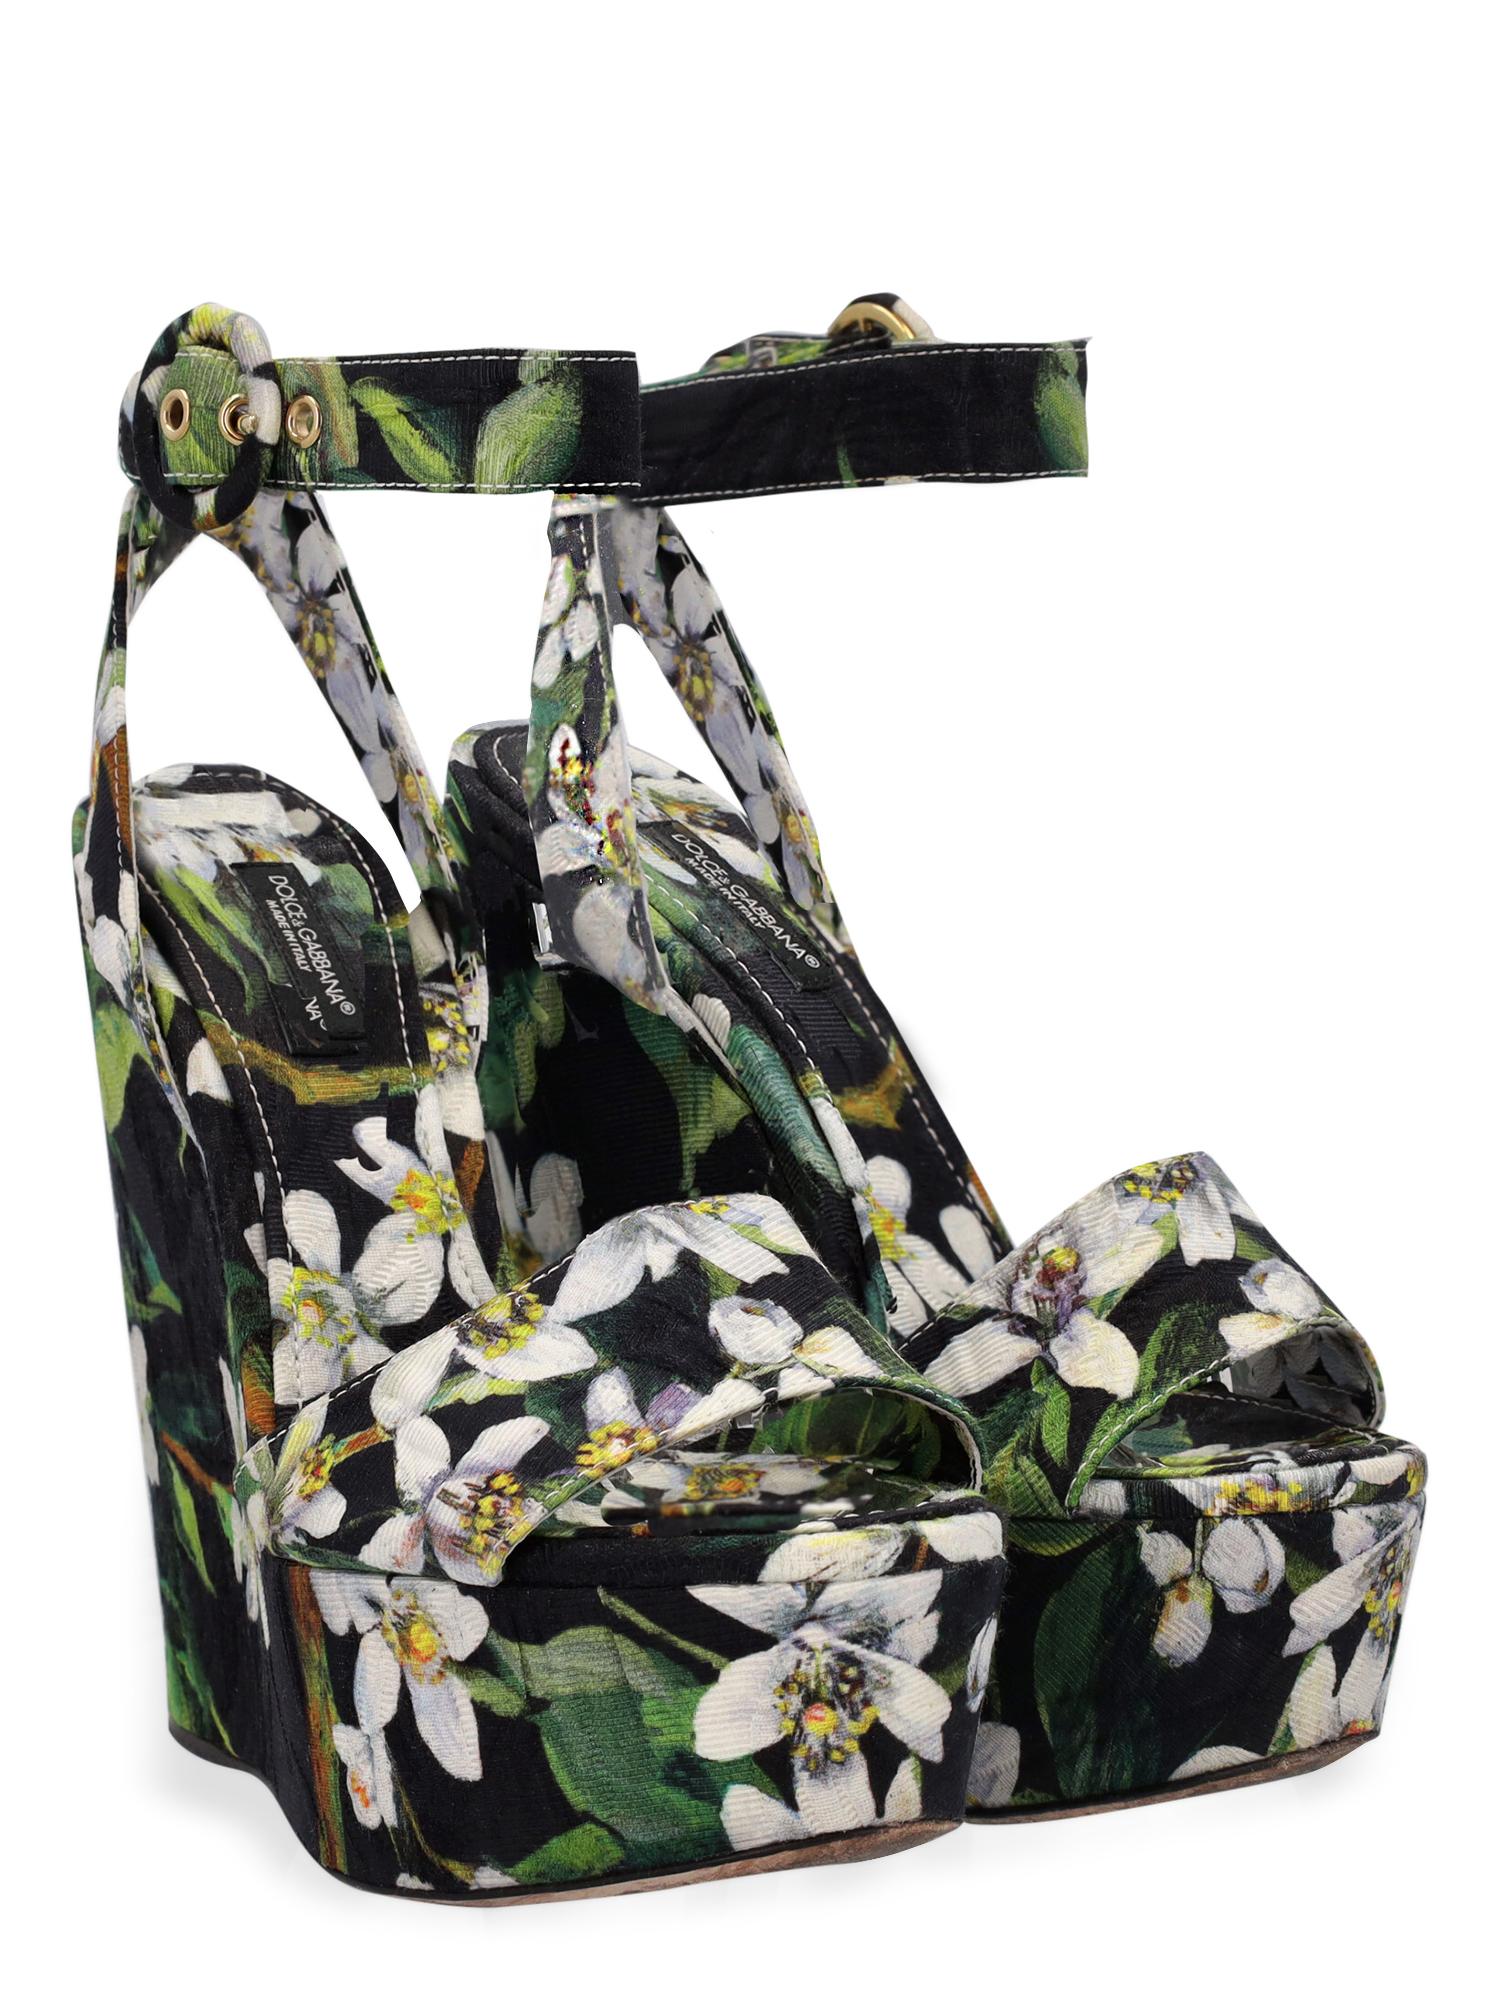 Product Description: Shoe, fabric, floral print, buckle fastening, gold-tone hardware, open toe, branded insole, wedge heel, high heel

Includes: 
- Dust bag

Product Condition: Very Good
Sole: visible signs of use.
	
Measurements:
Height: 14